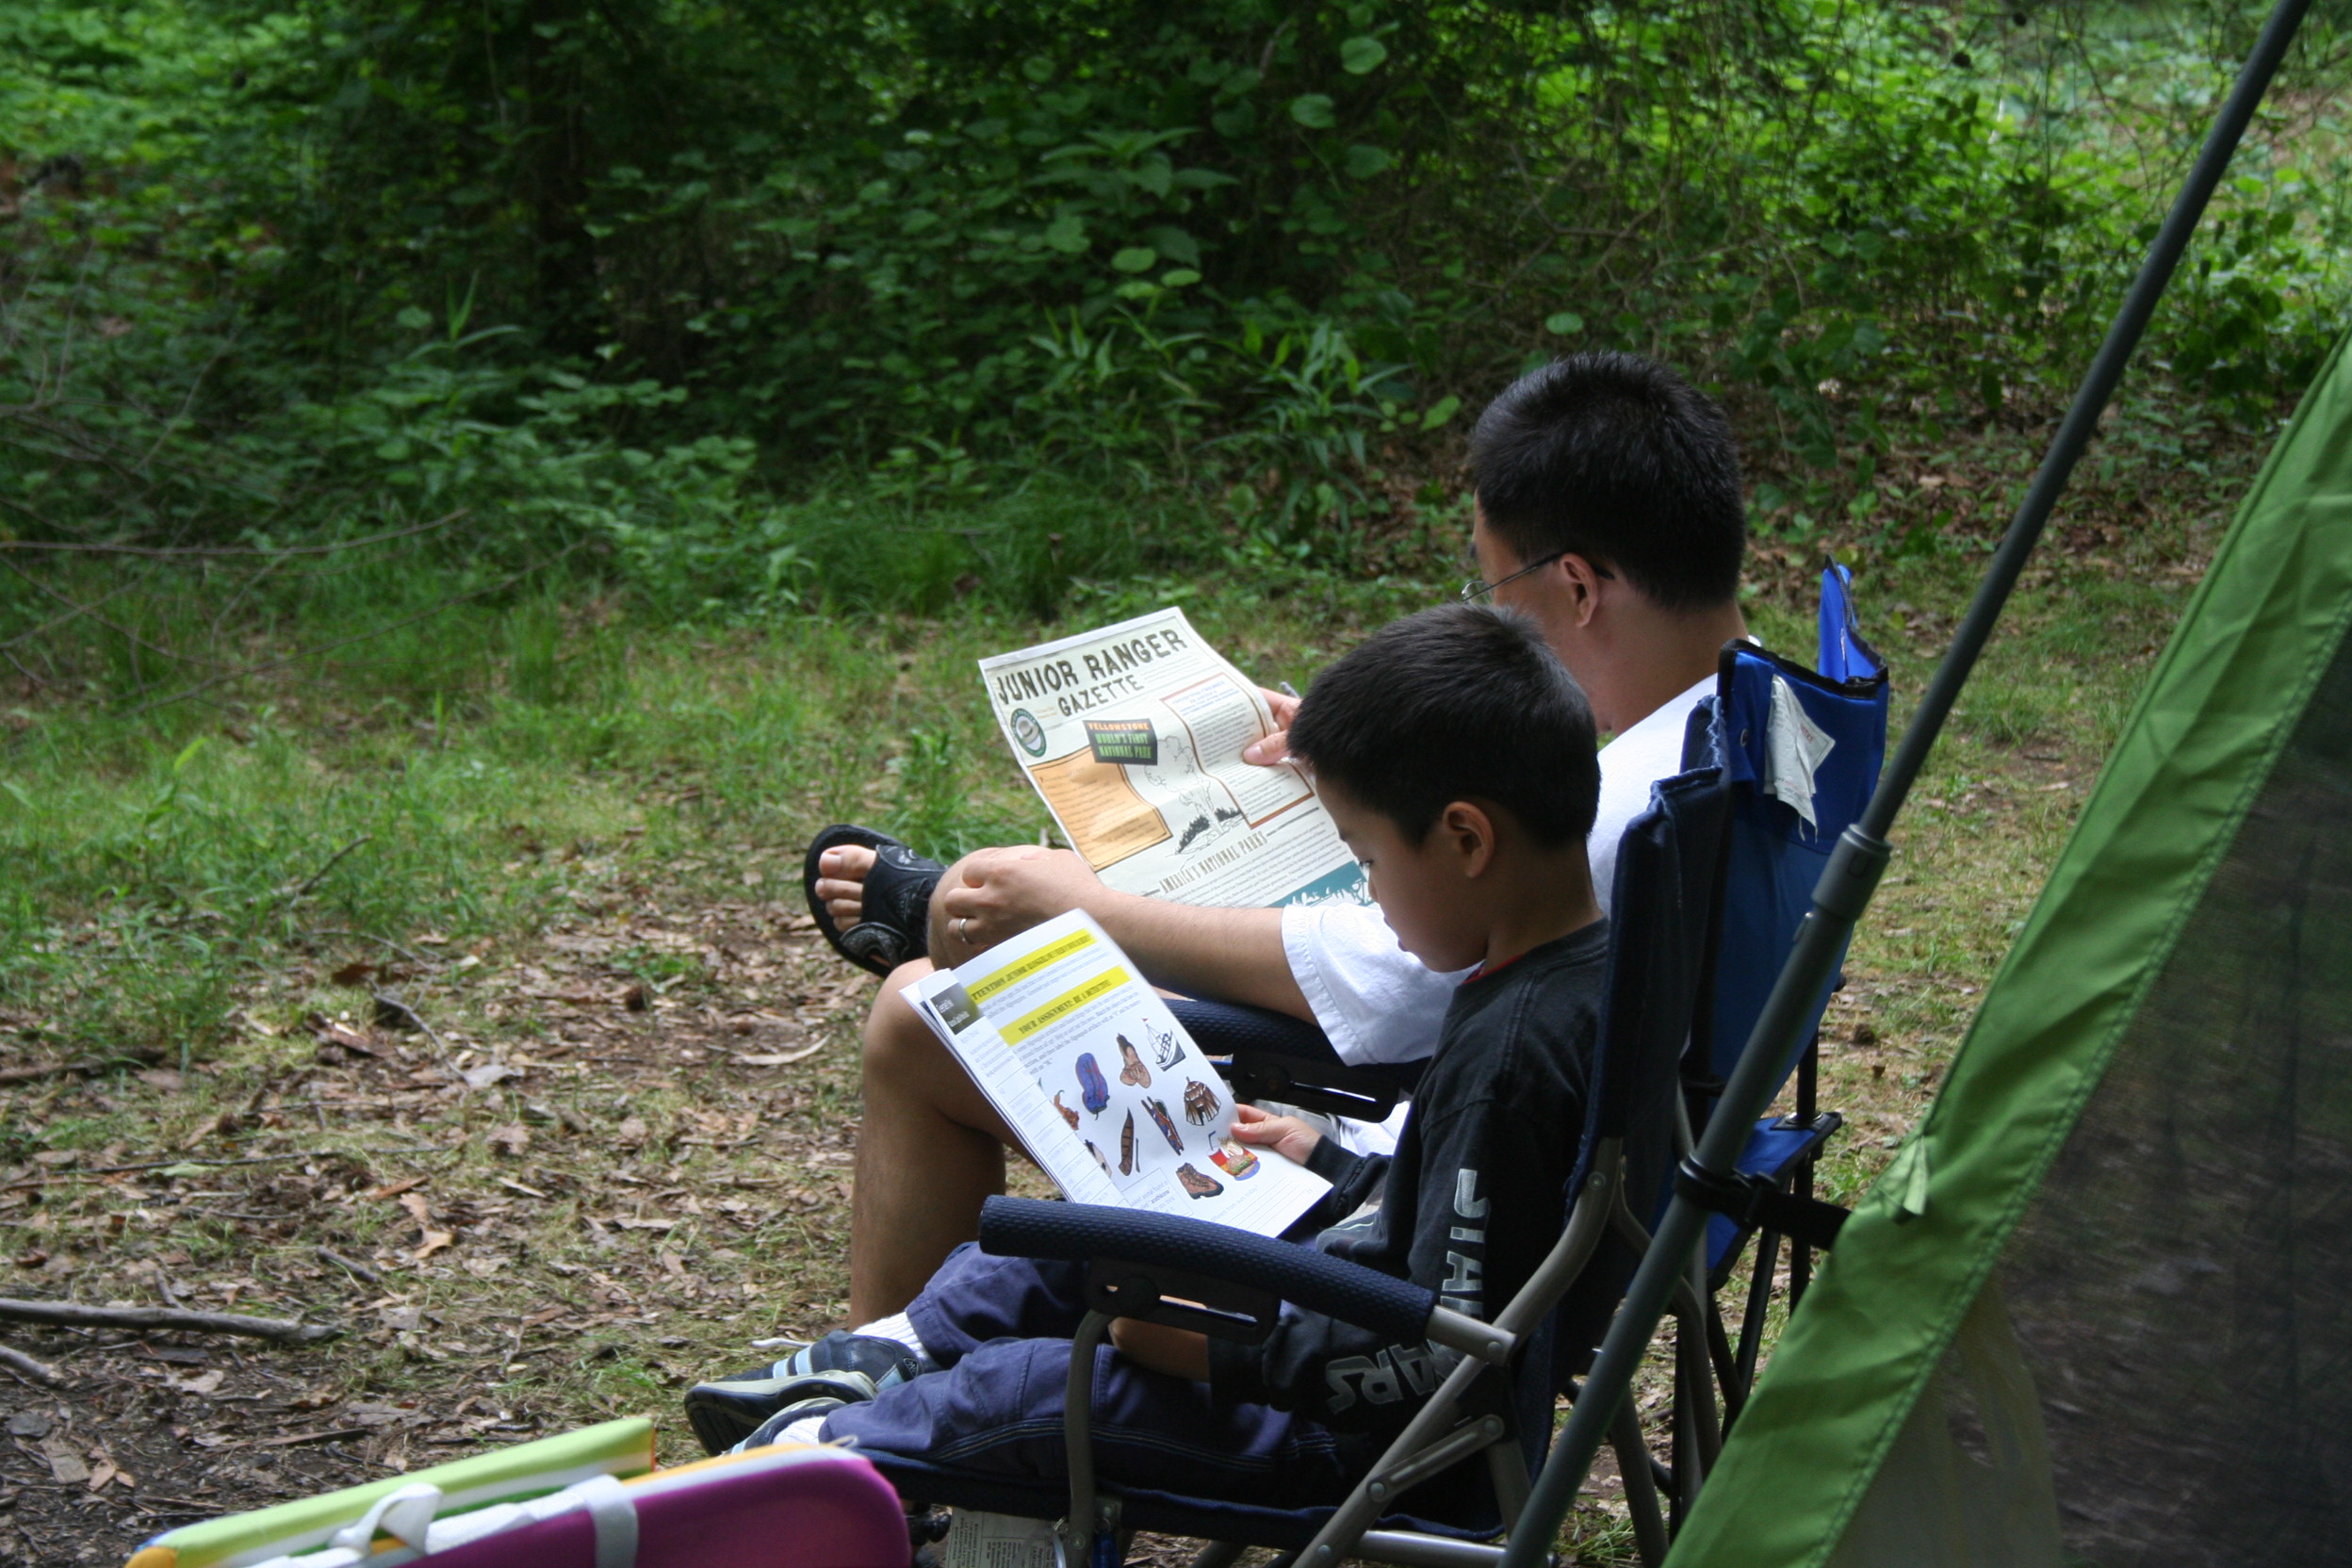 Father and son sitting in chairs reading in the Greenbelt Park campground